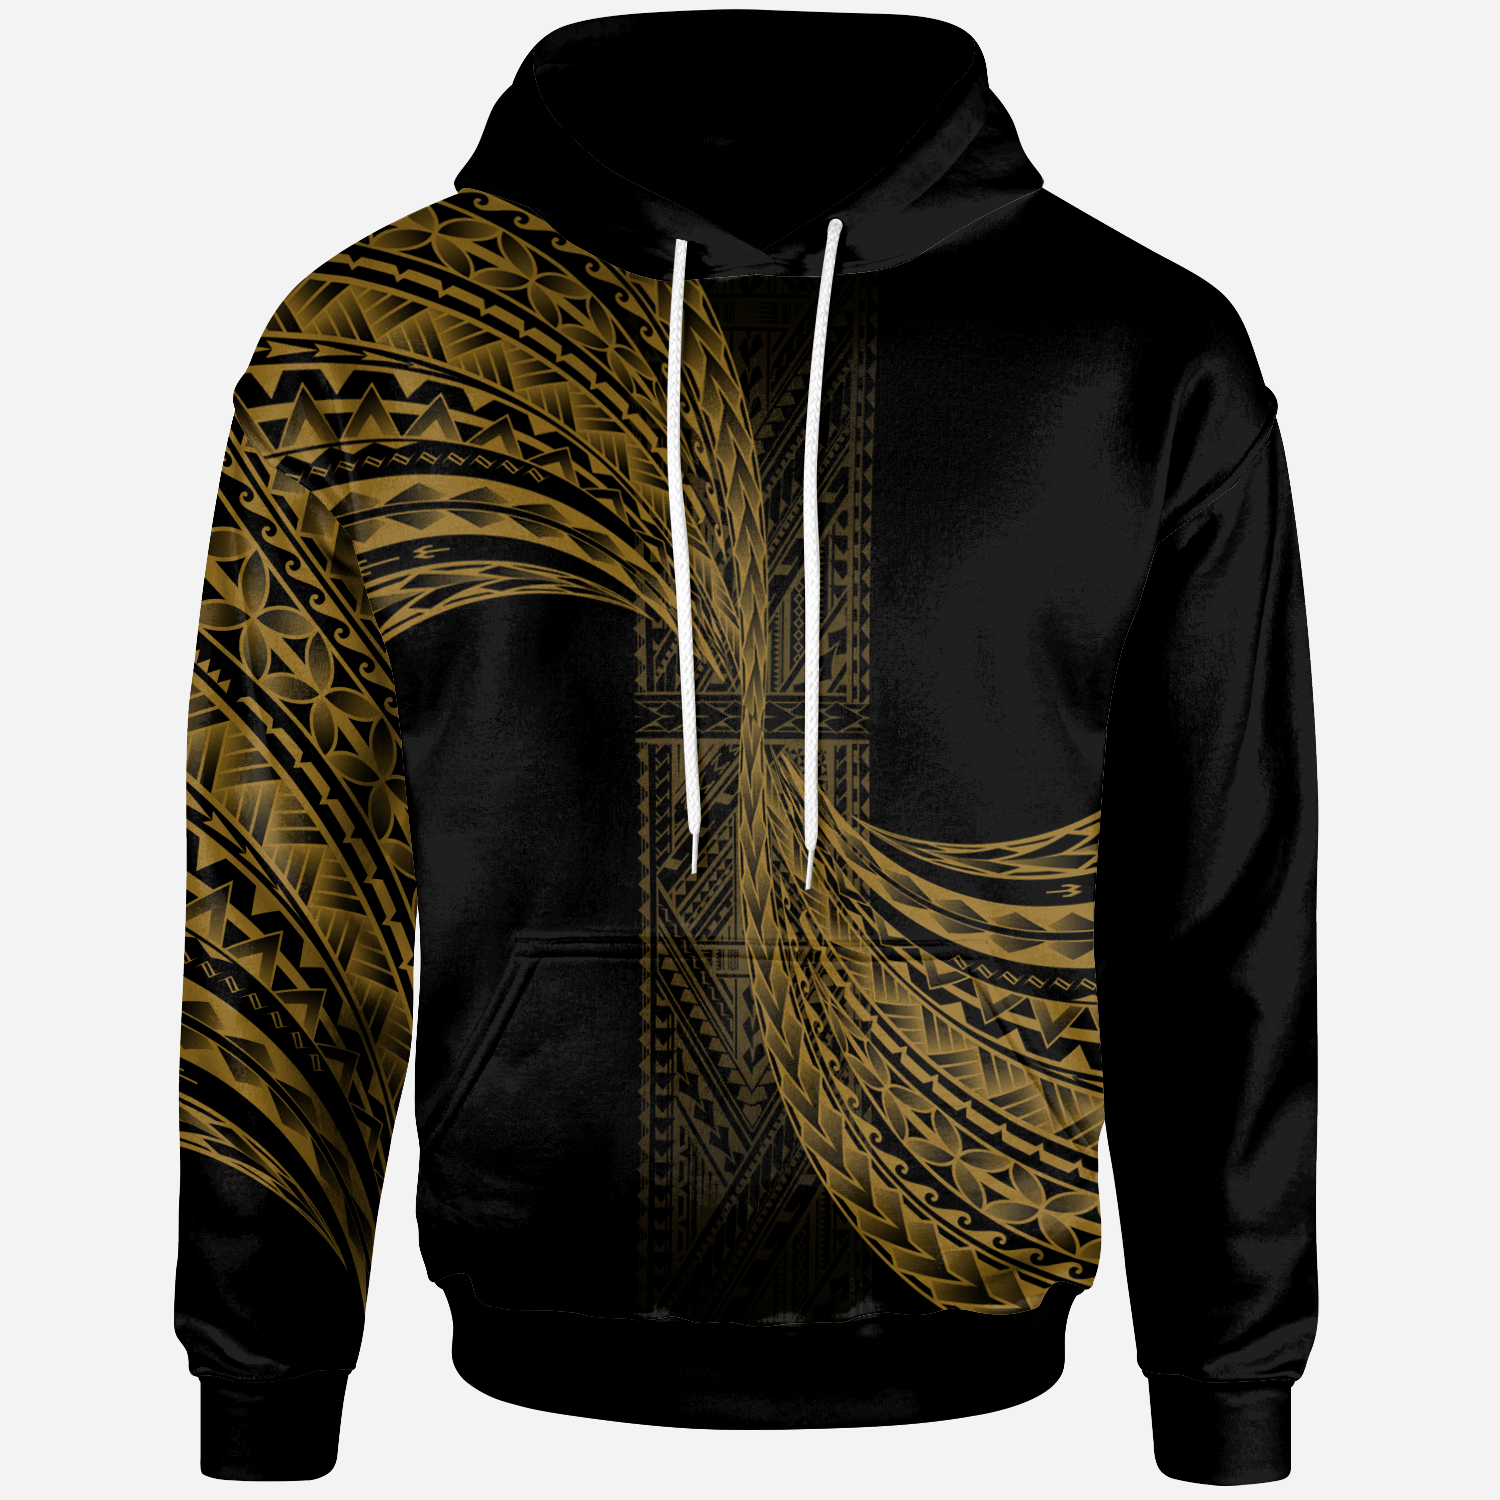 polynesian-hoodie-polynesian-patterns-gold-color